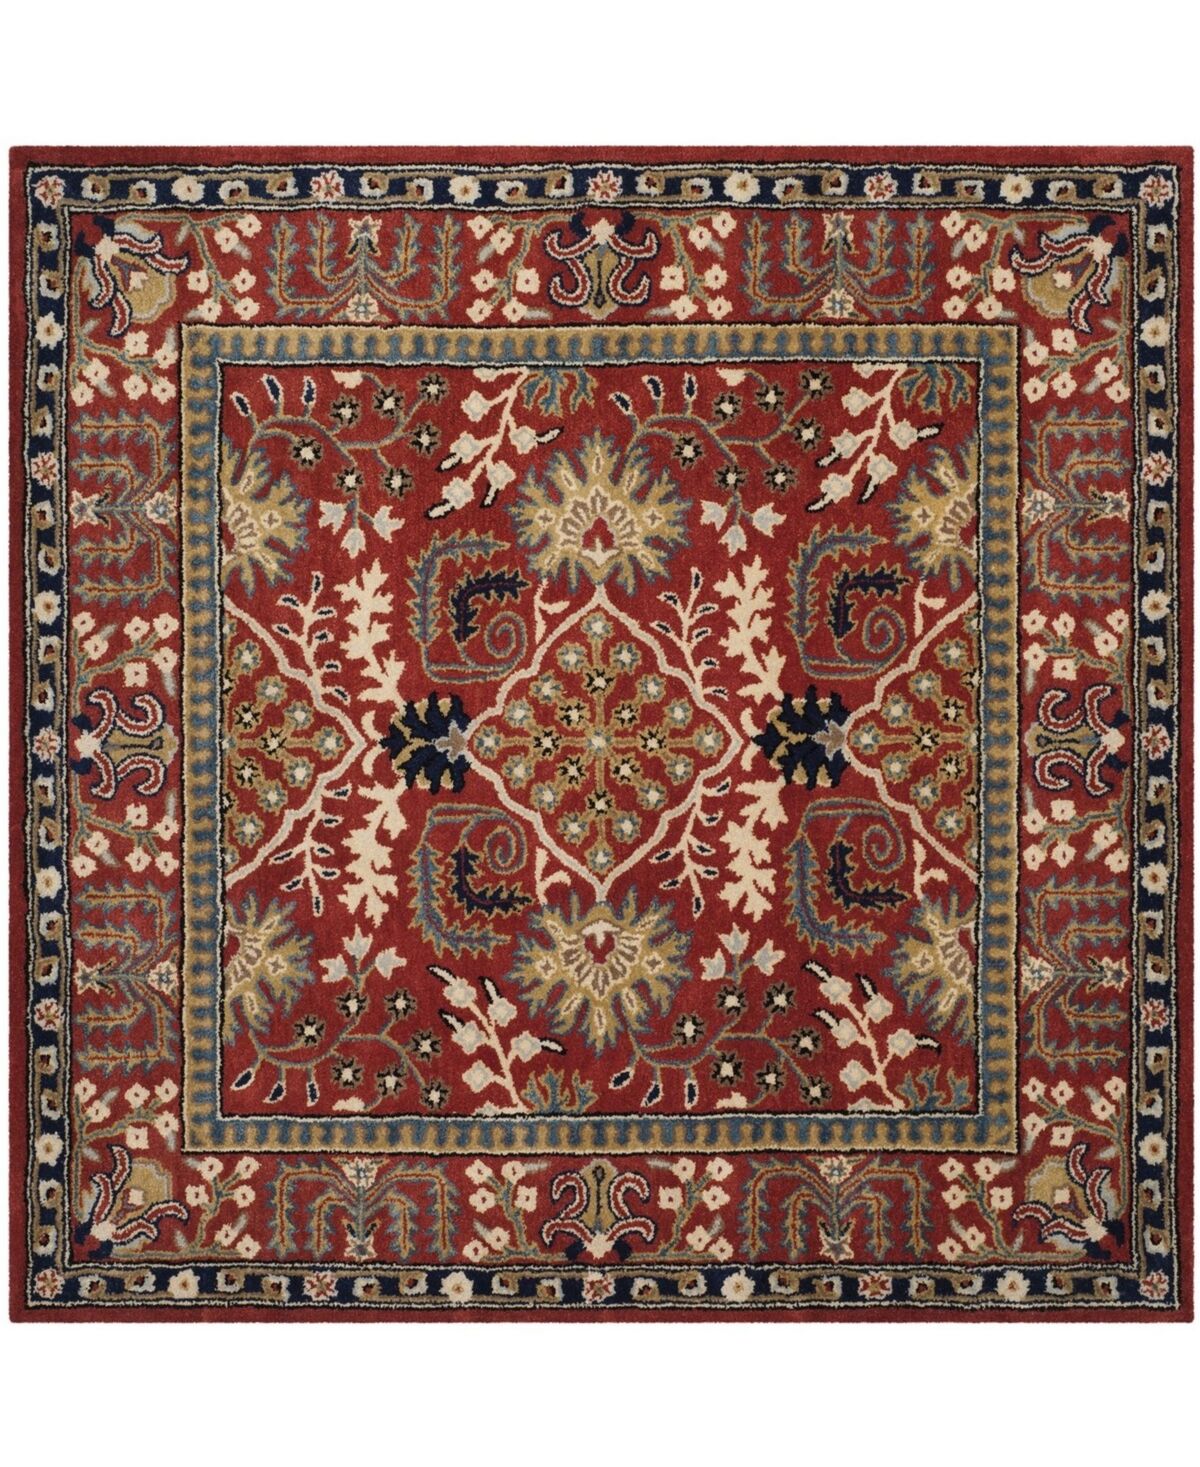 Safavieh Antiquity At64 Red and Multi 6' x 6' Square Area Rug - Red